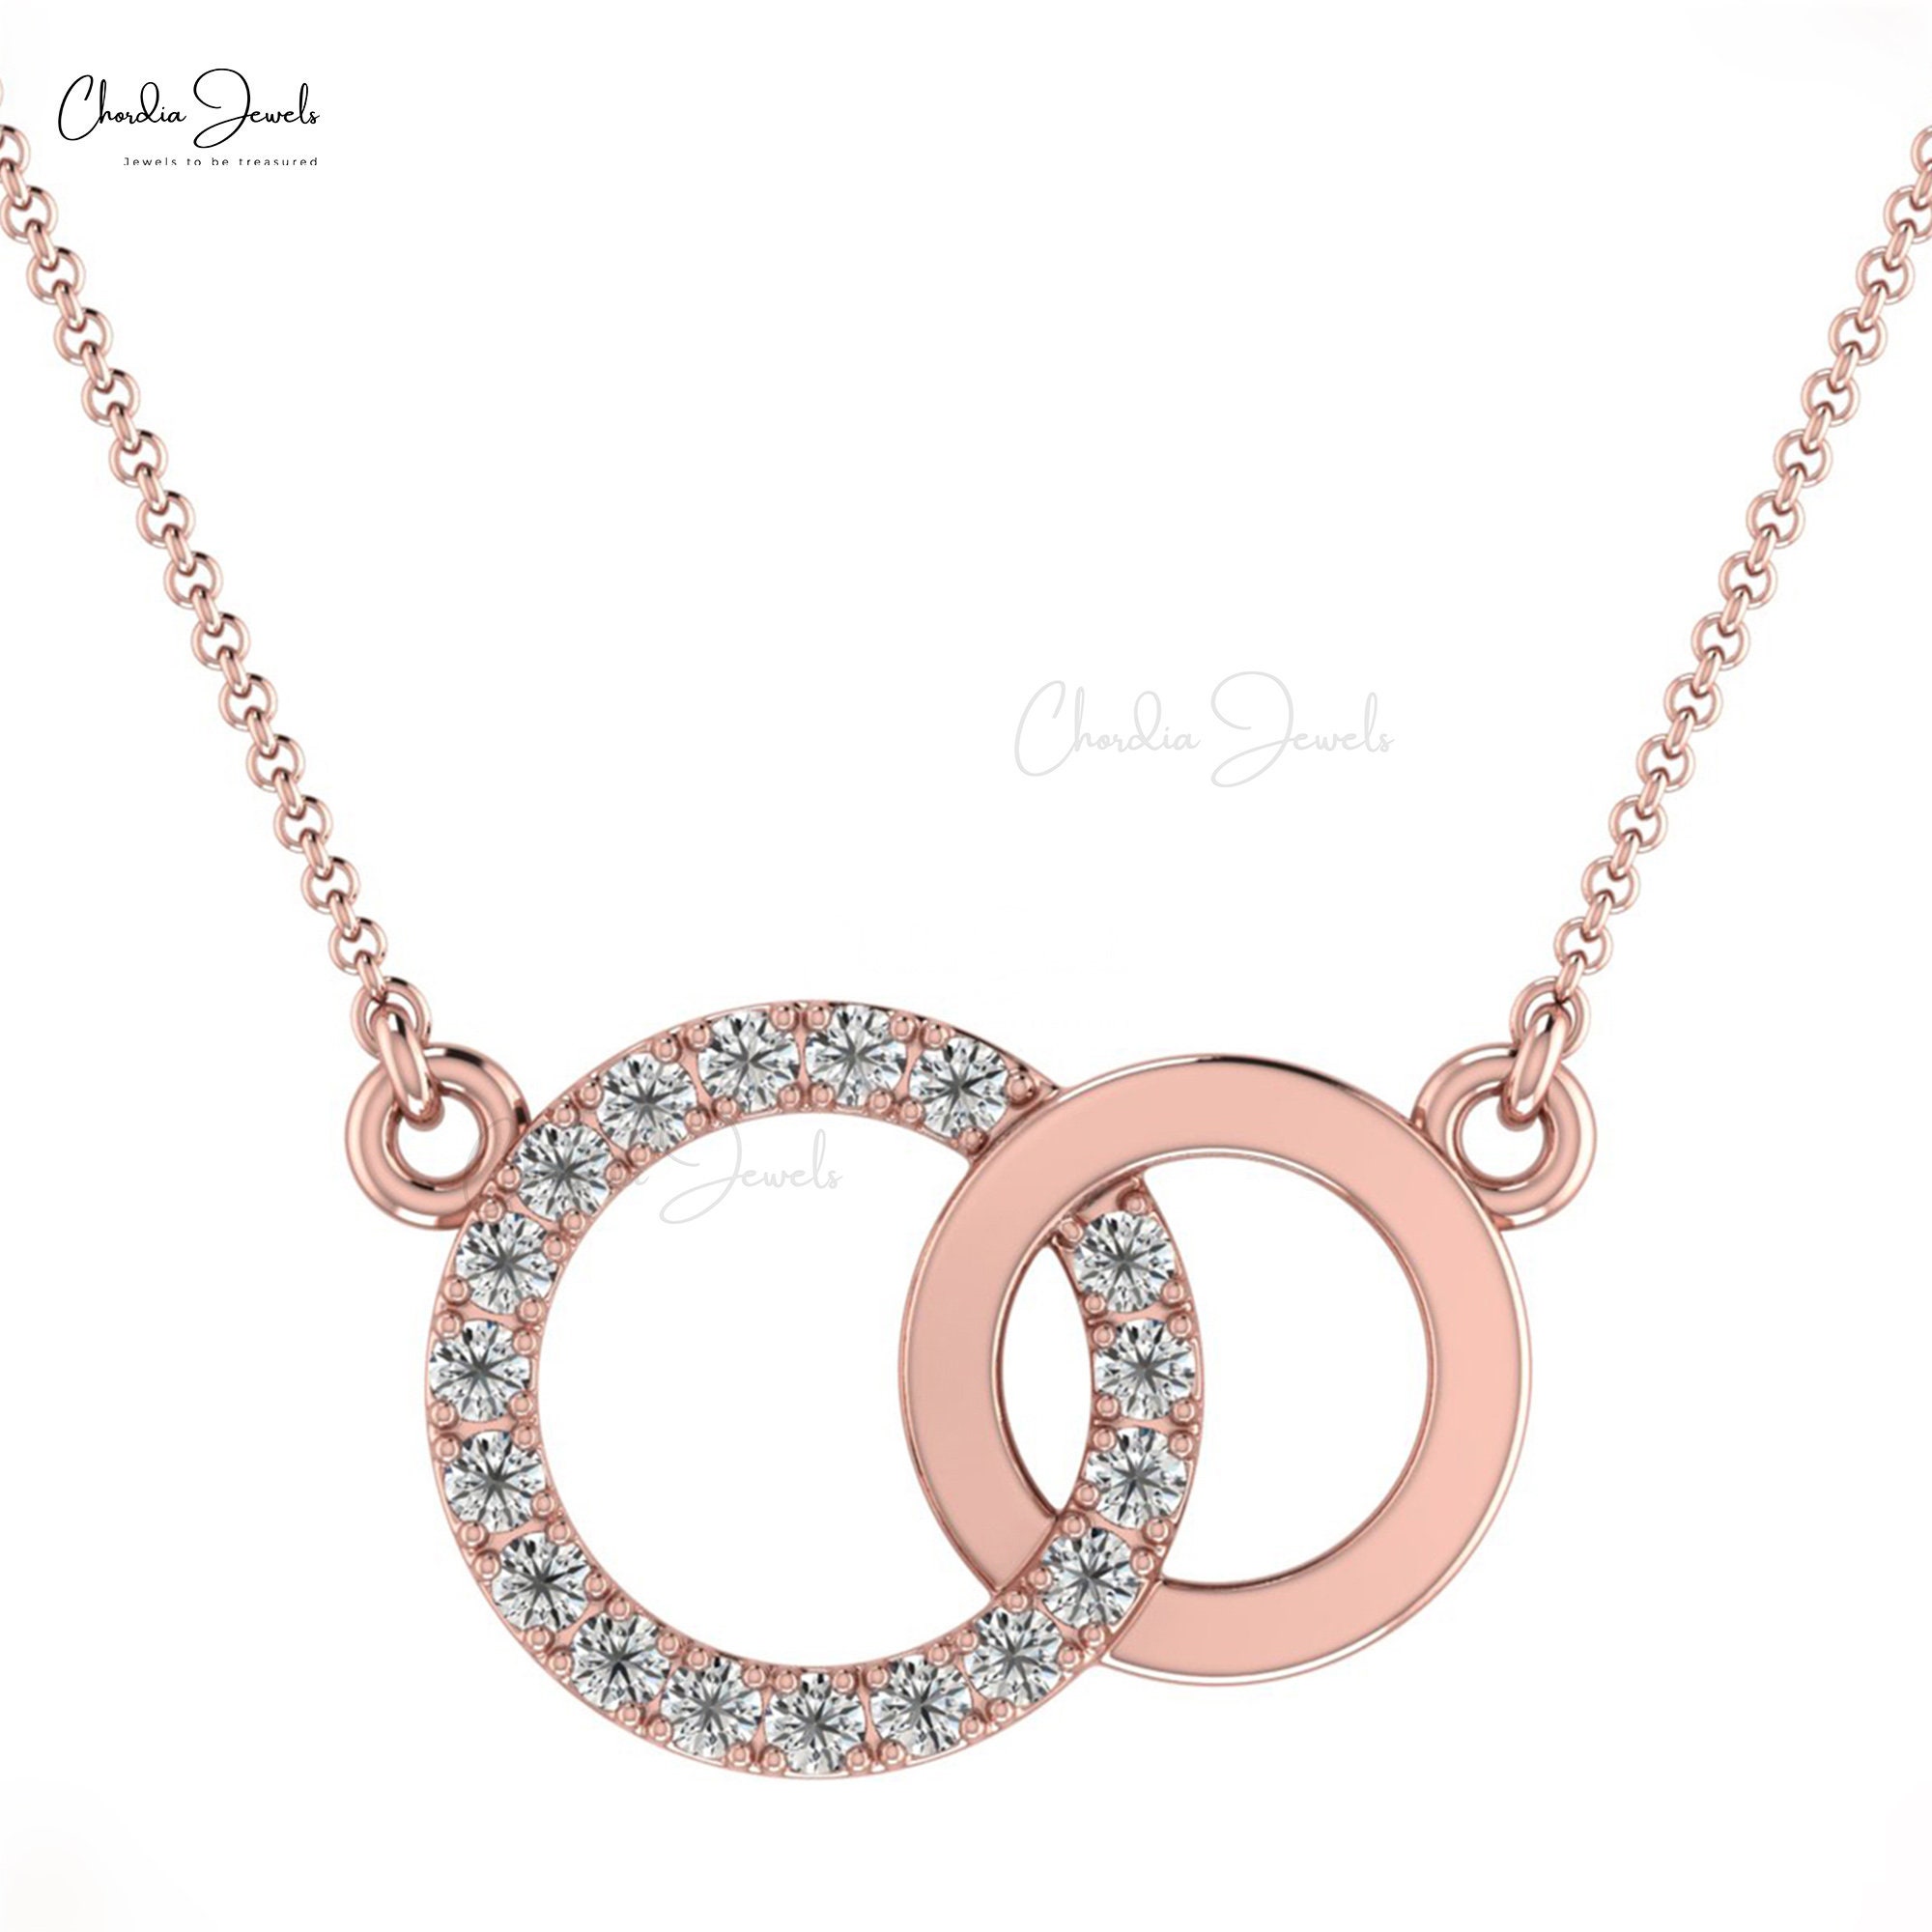 Intertwined Diamond Double Circle Necklace in 18K Rose Gold (0.67ct)